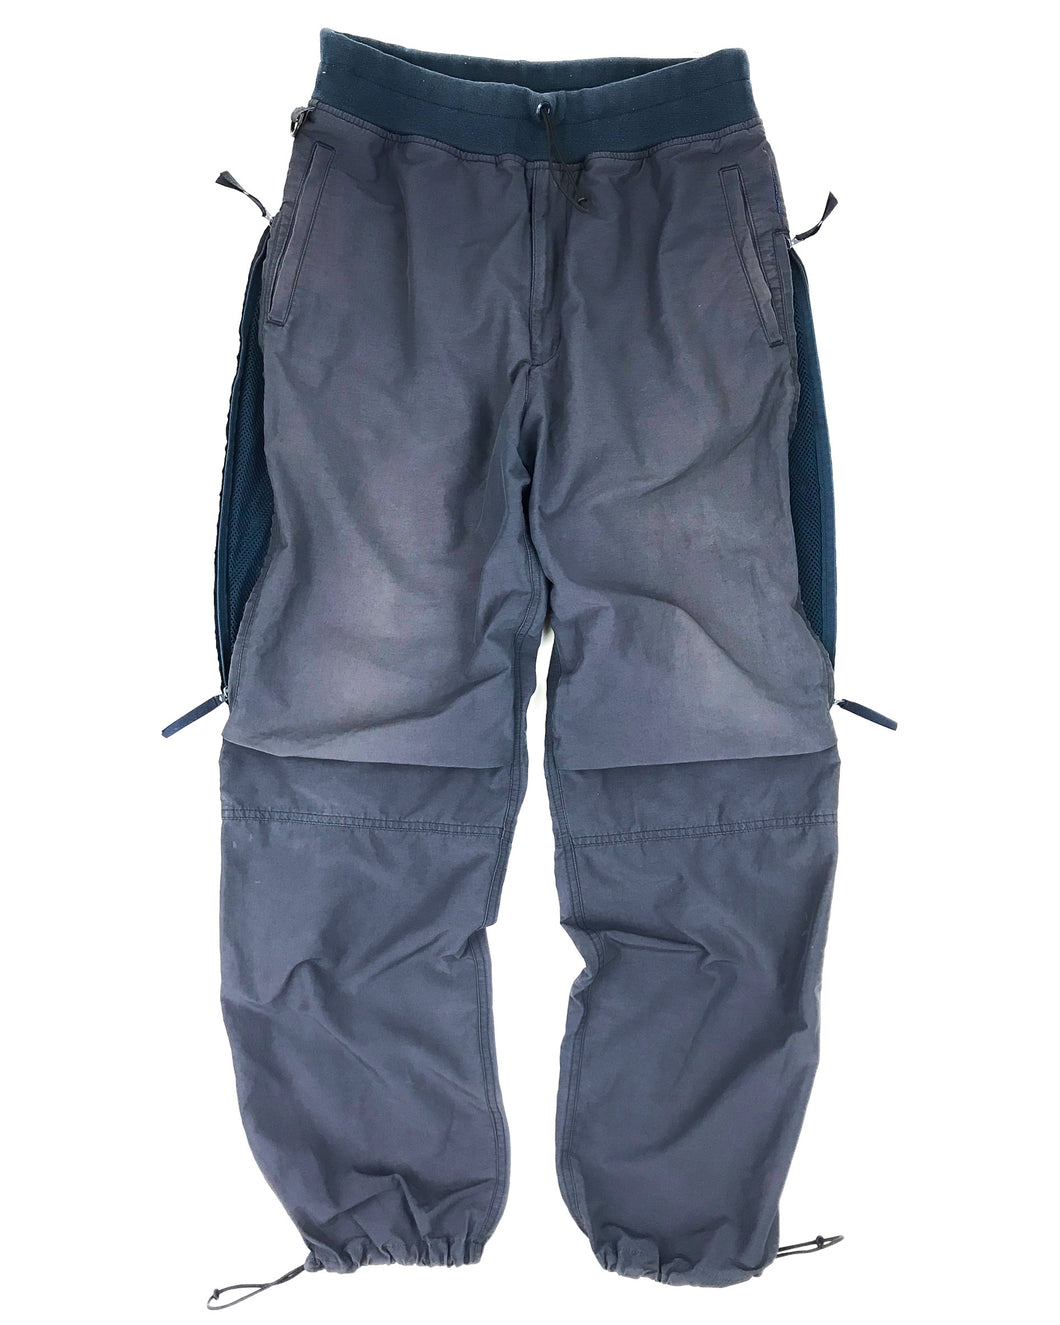 GOODENOUGH Ventilated Tech Pants (Early 2000’s)